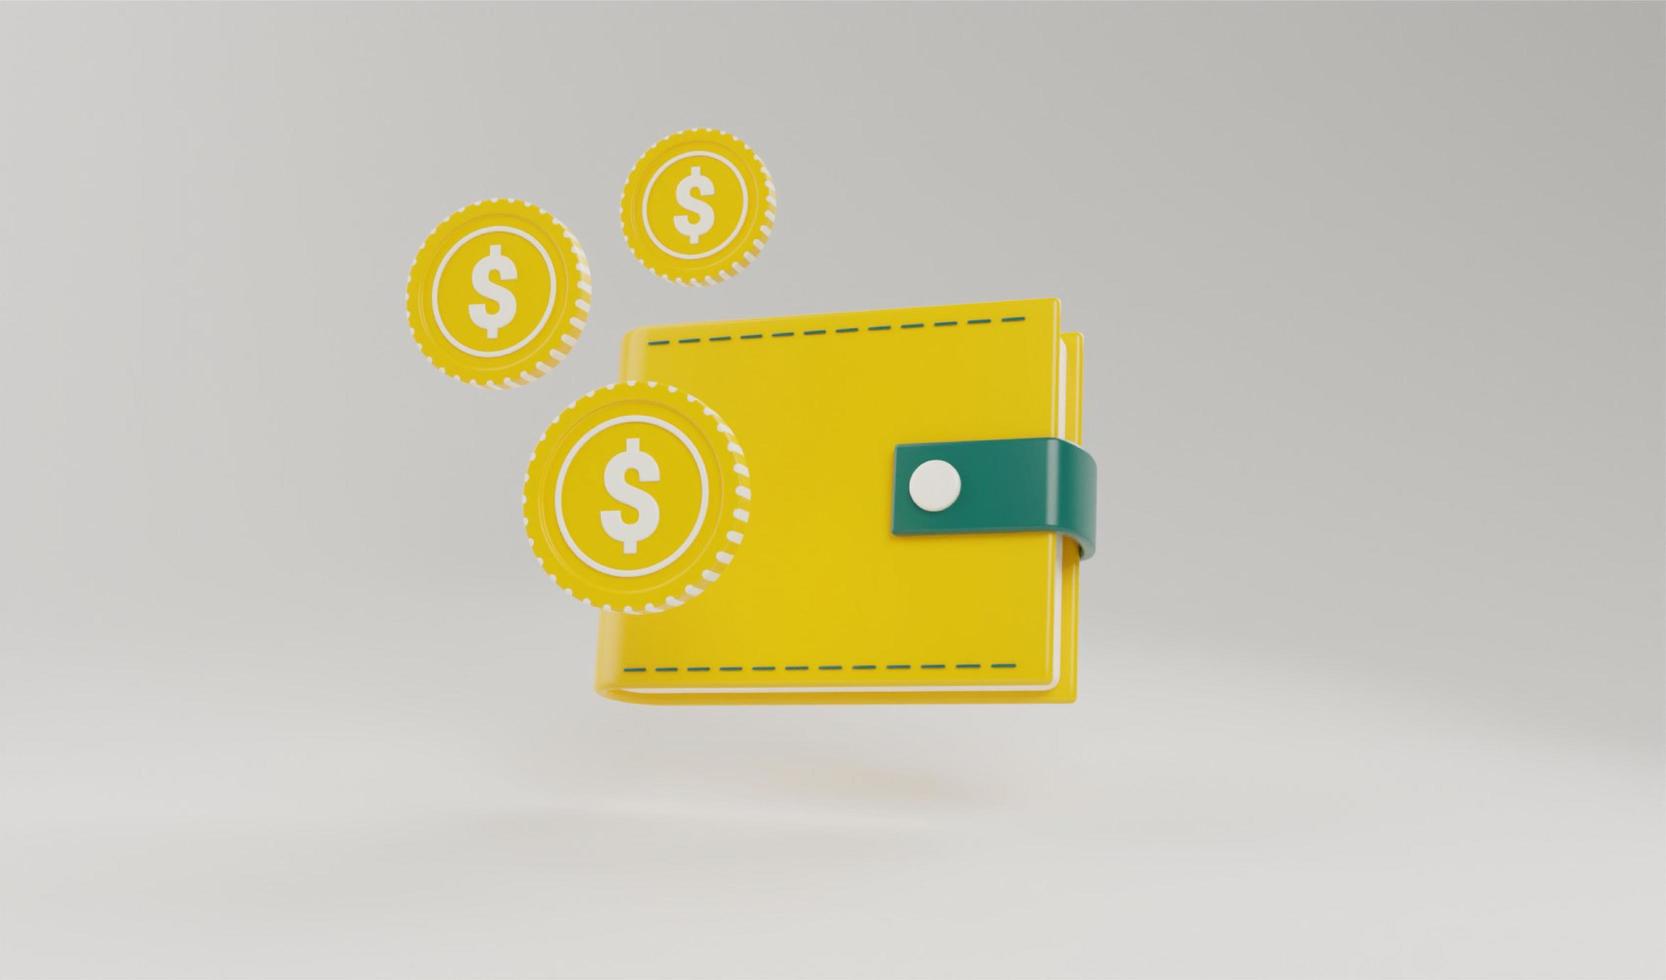 3D render wallet with money saving, bill, floating coins stack, and credit card concept illustration photo